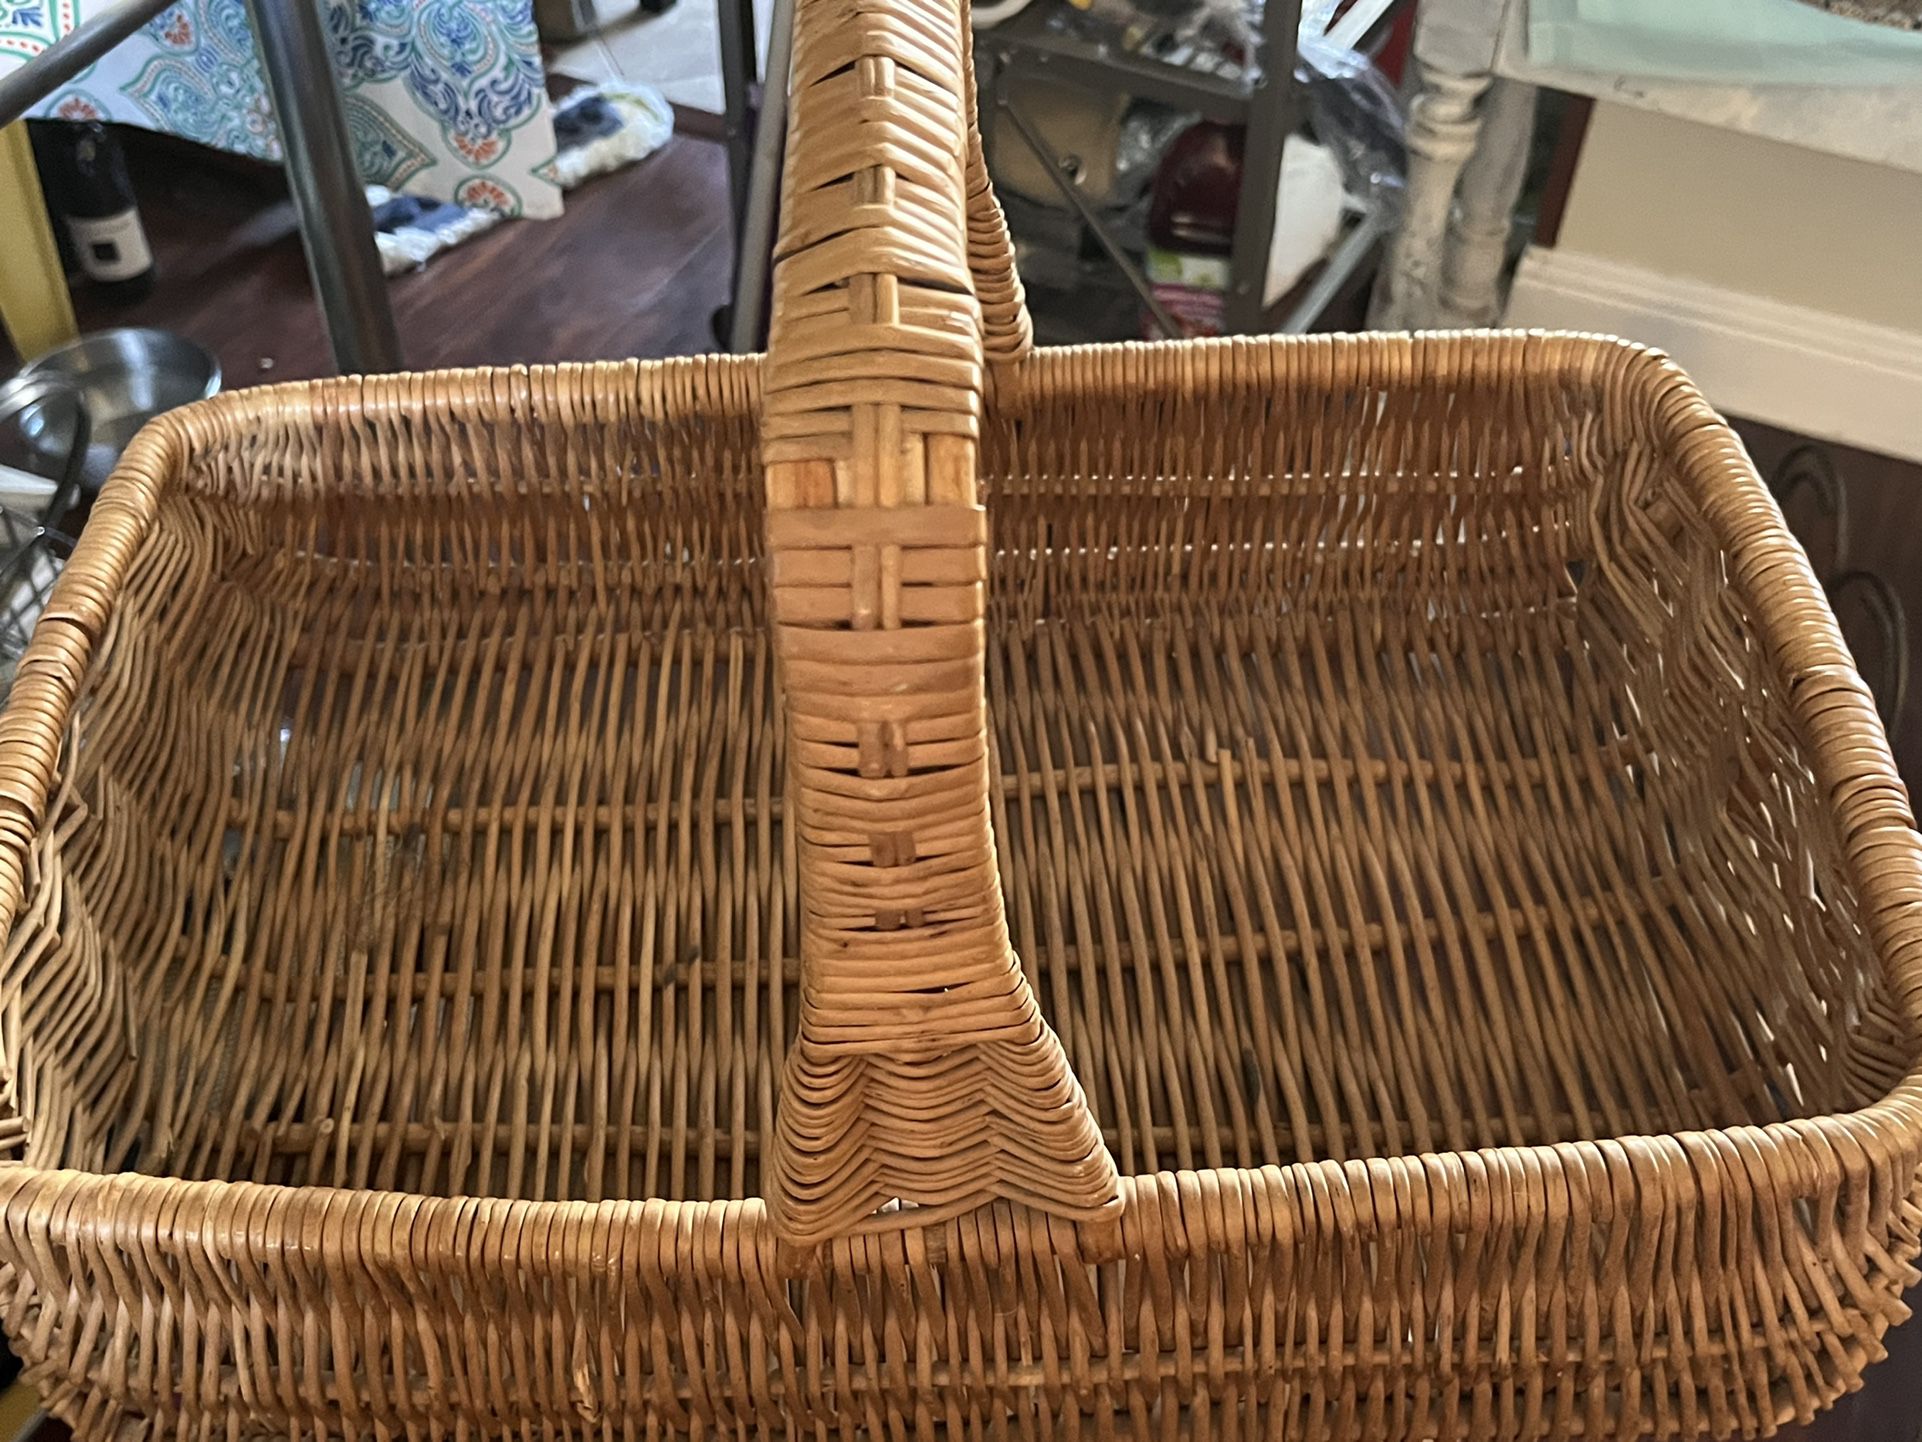 Basket  Approx 18”  Long  Good Condition